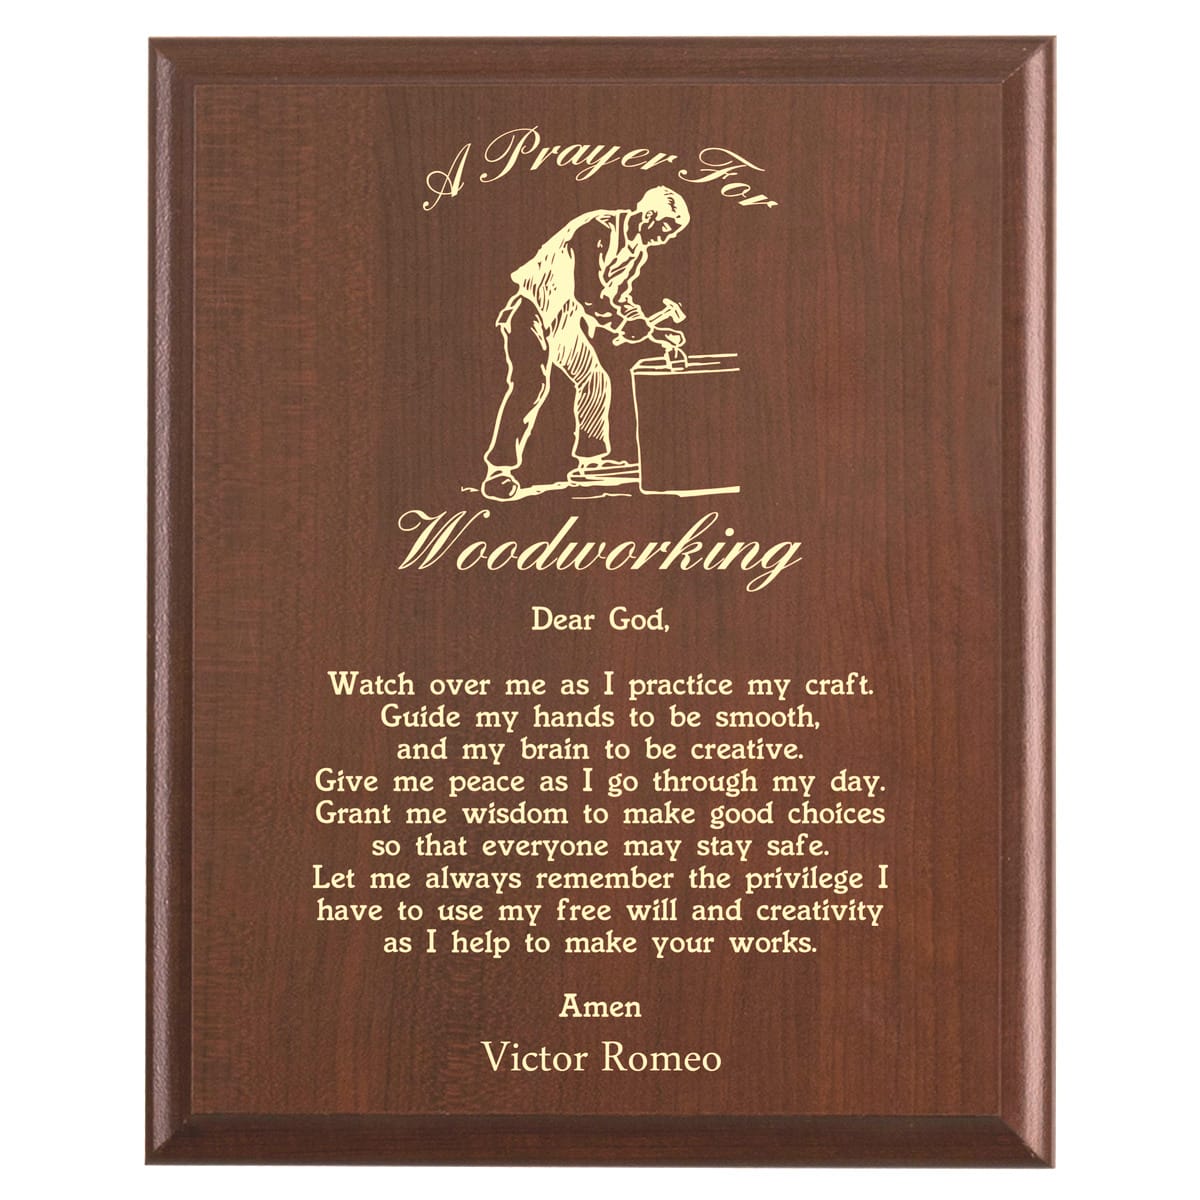 Plaque photo: Woodworking Prayer Plaque design with free personalization. Wood style finish with customized text.